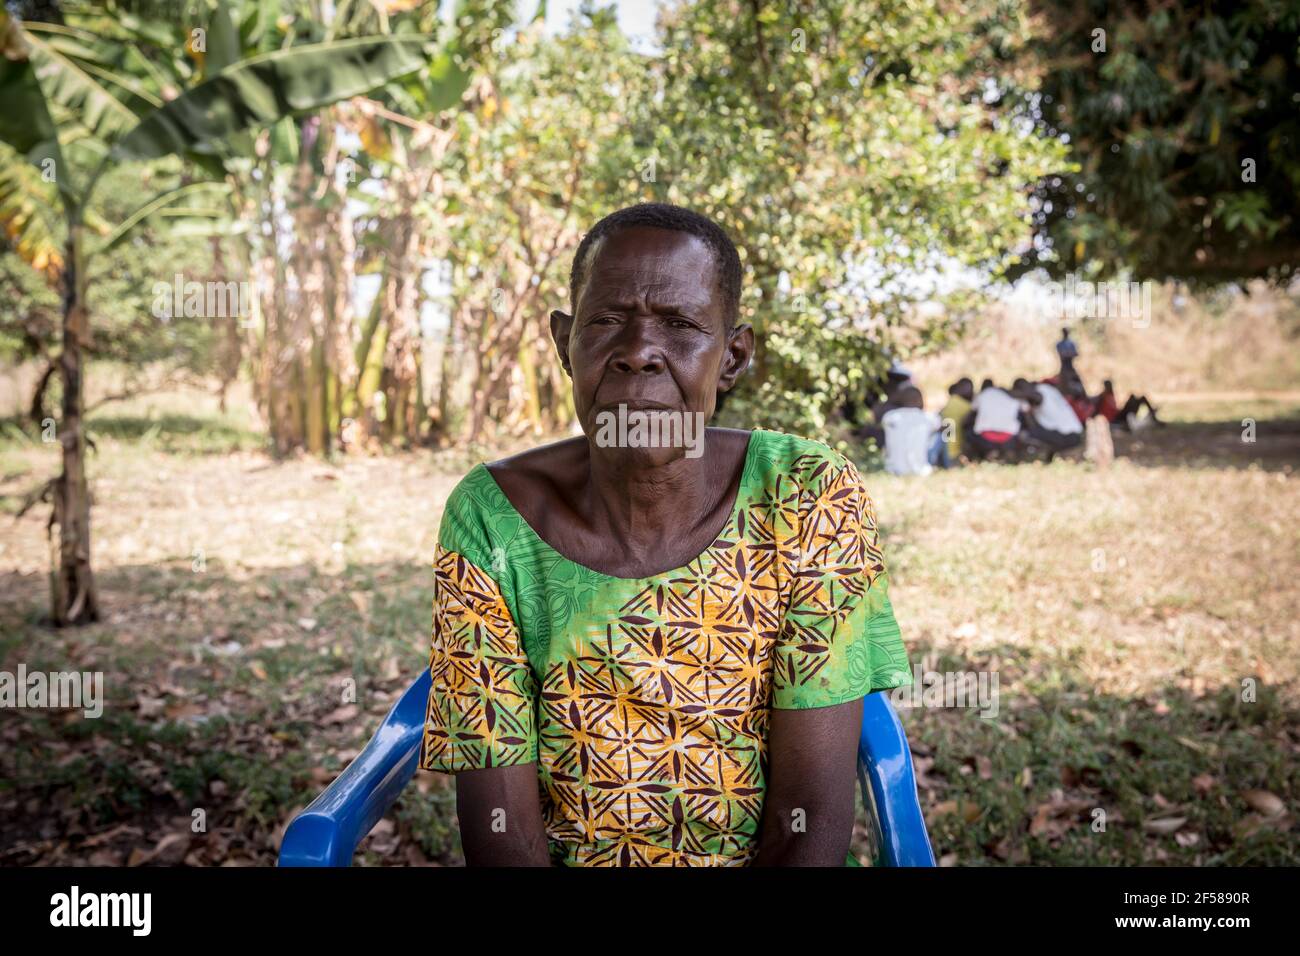 Gulu, Uganda. 5th Feb, 2021. Ladu Cecelia, an aunt who said she acted as a mother to Dominic Ongwen after his own was killed. She said she wants to visit him in Europe. Dominic Ongwen was convicted on 61 counts of war crimes and crimes against humanity on February 4, 2021. His case was controversial, as he was a former child soldier who rose the ranks of the Lord's Resistance Army to become one of its top commanders. Credit: Sally Hayden/SOPA Images/ZUMA Wire/Alamy Live News Stock Photo